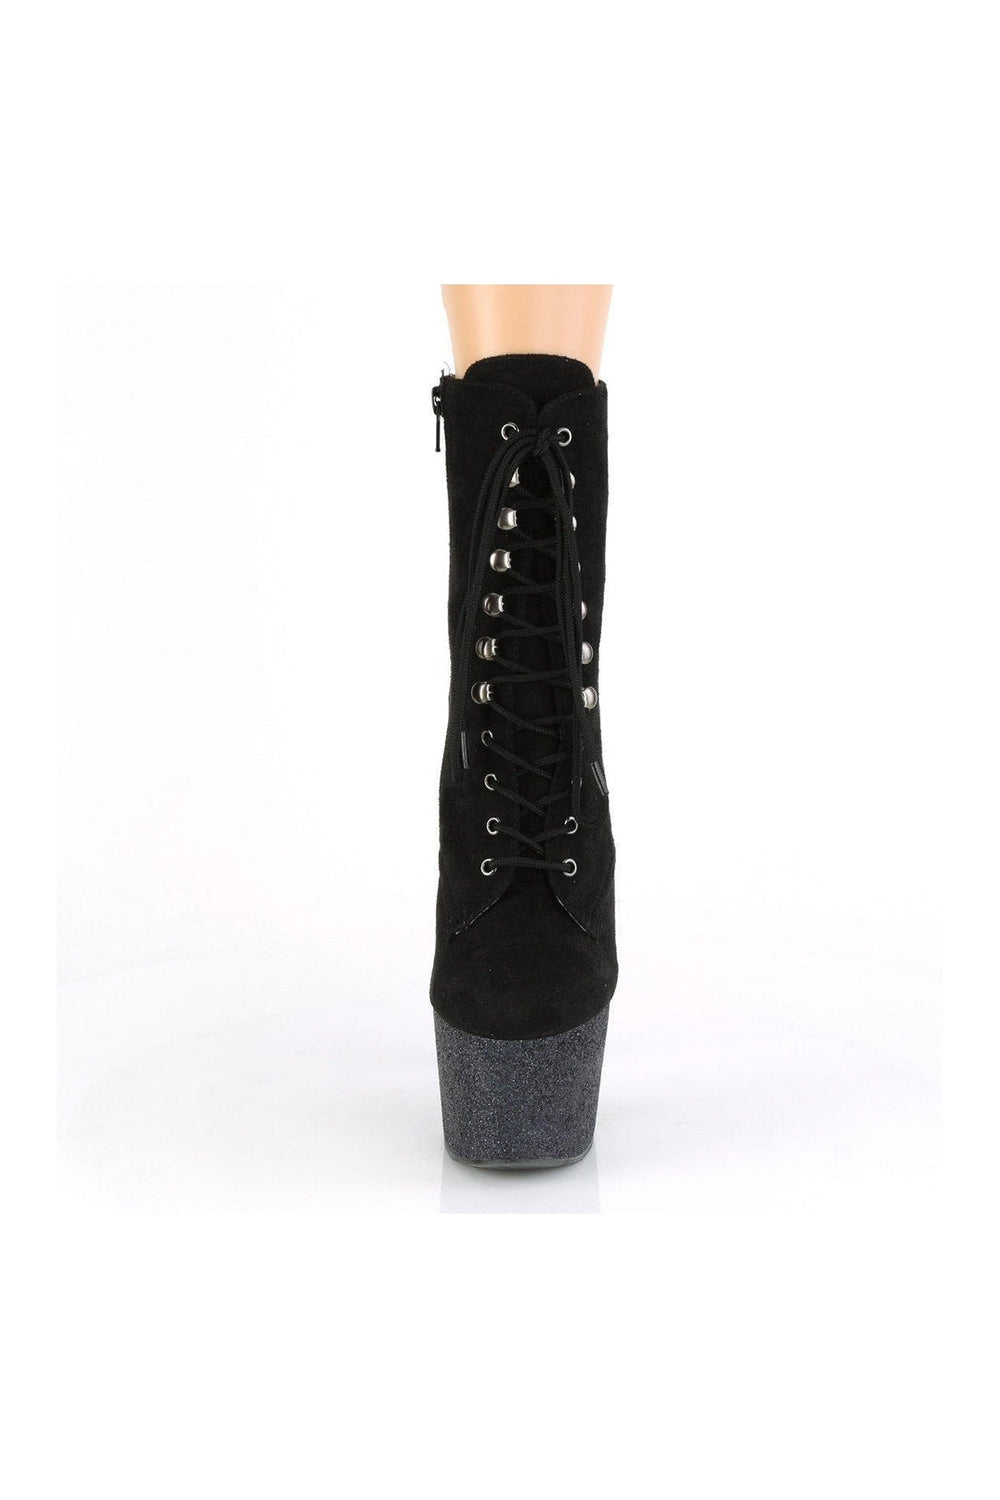 ADORE-1020FSMG Stripper Ankle Boot-Ankle Boots-Pleaser-SEXYSHOES.COM